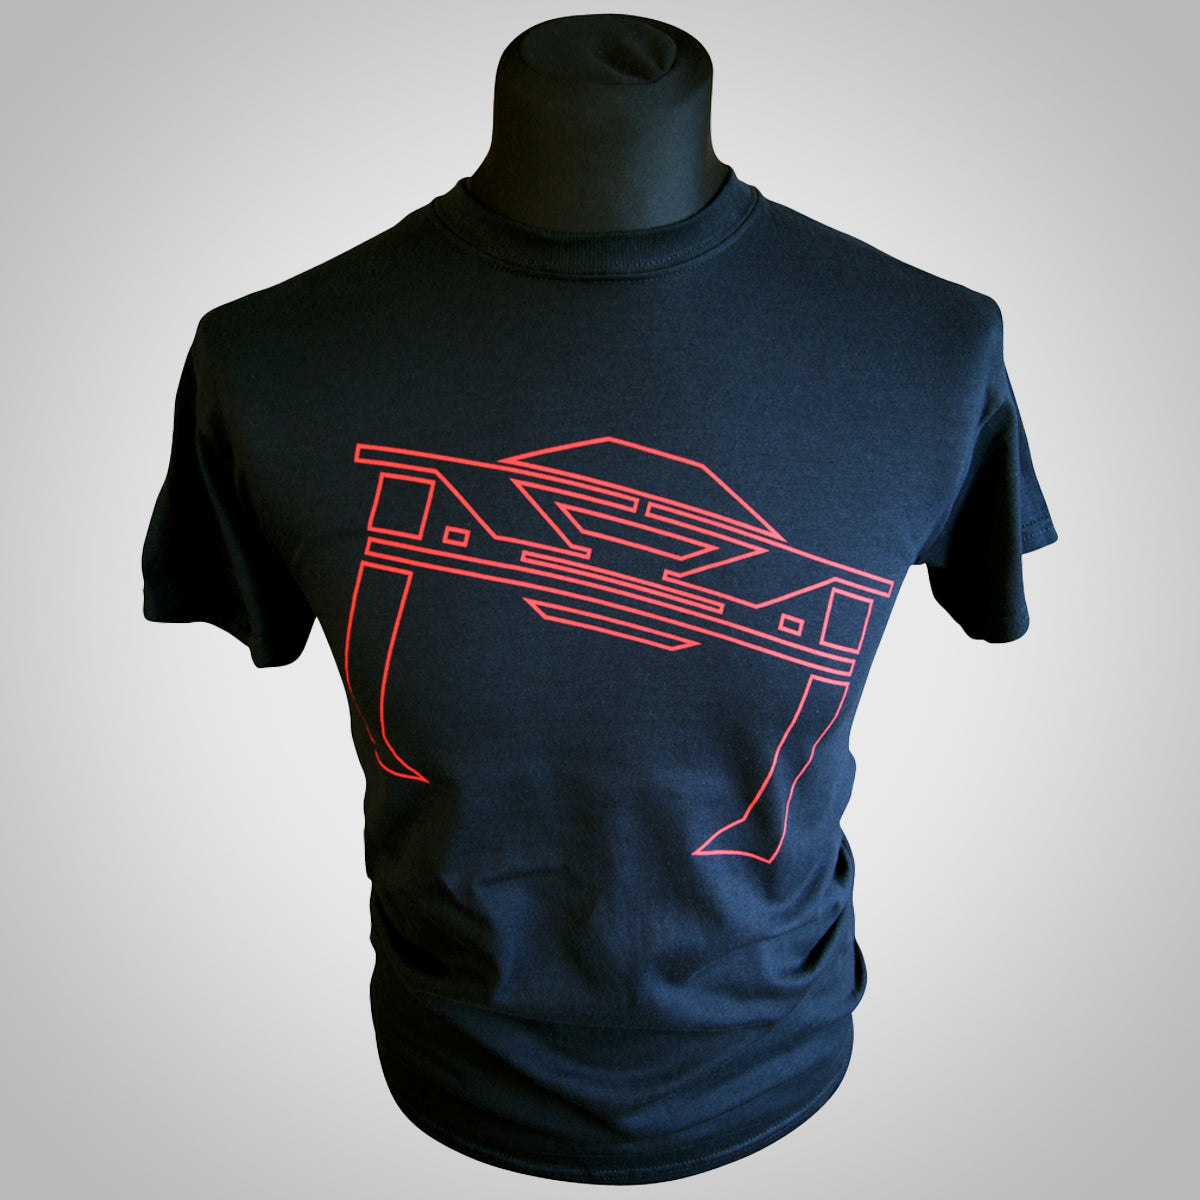 Recognizer T Shirt